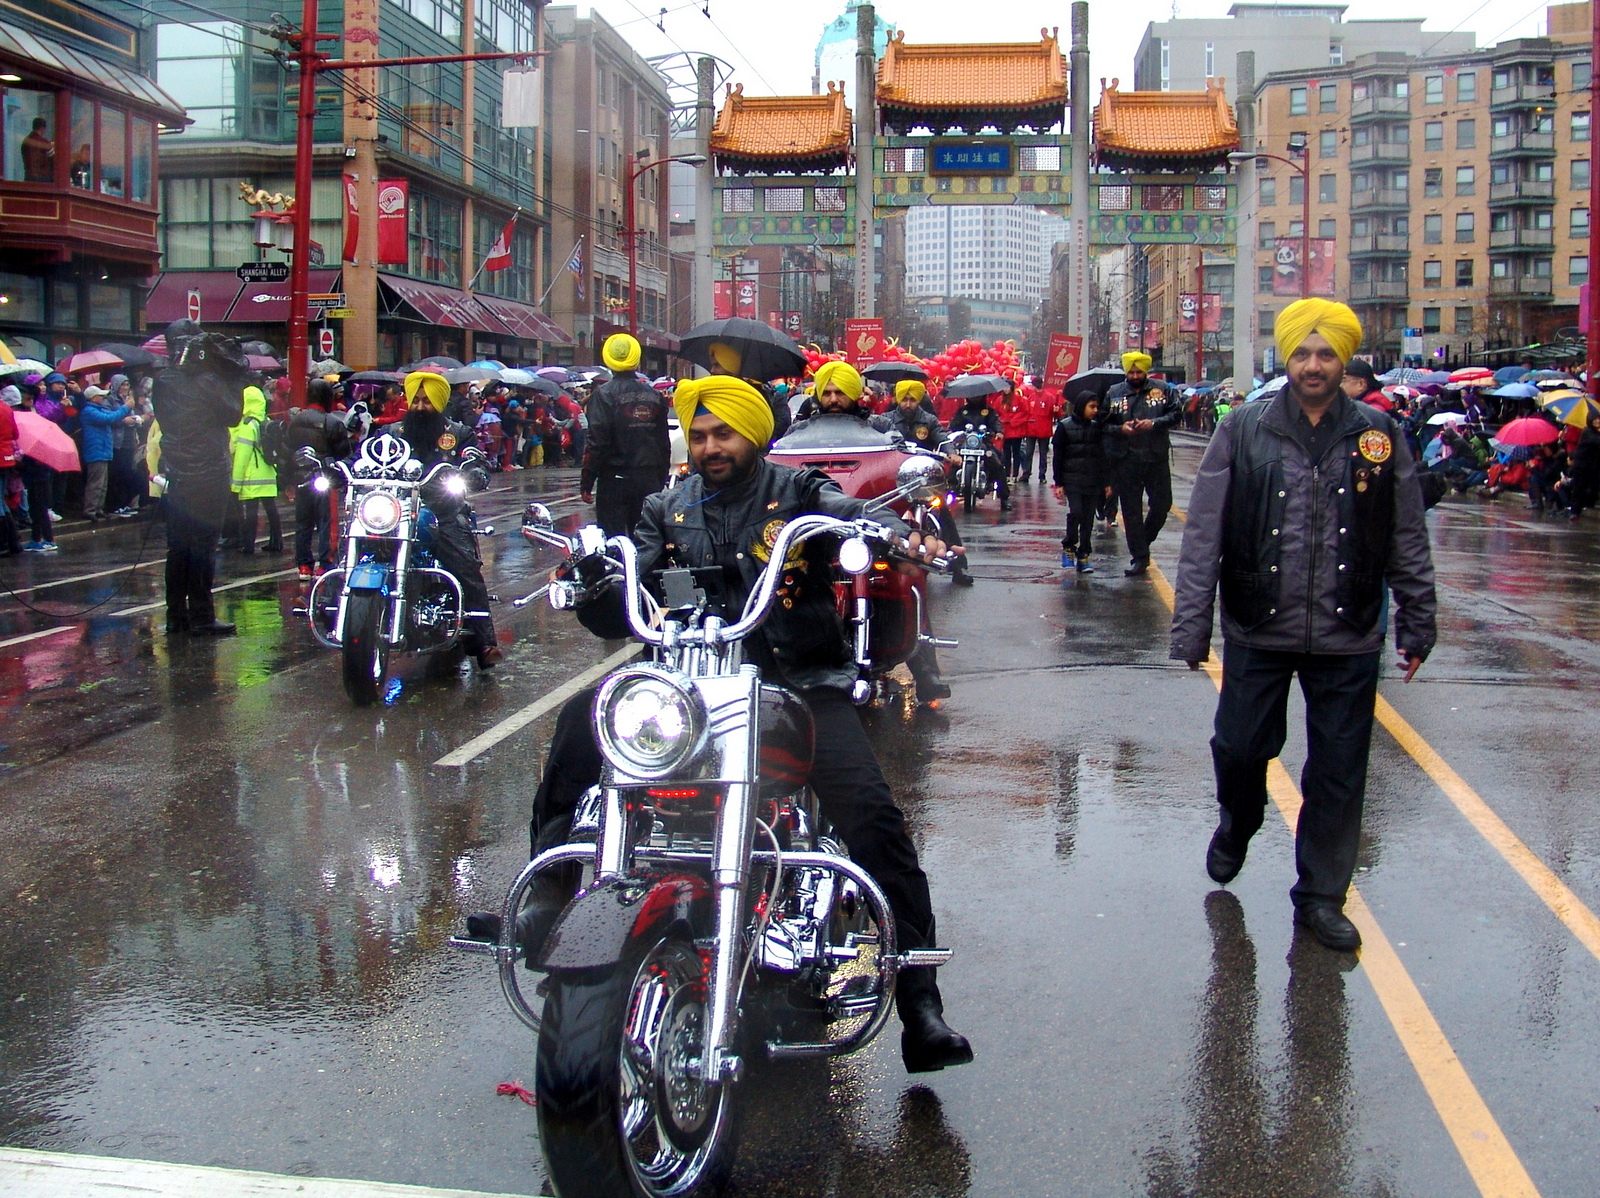 Indian Sikhs wearing yellow turbans on motocycles